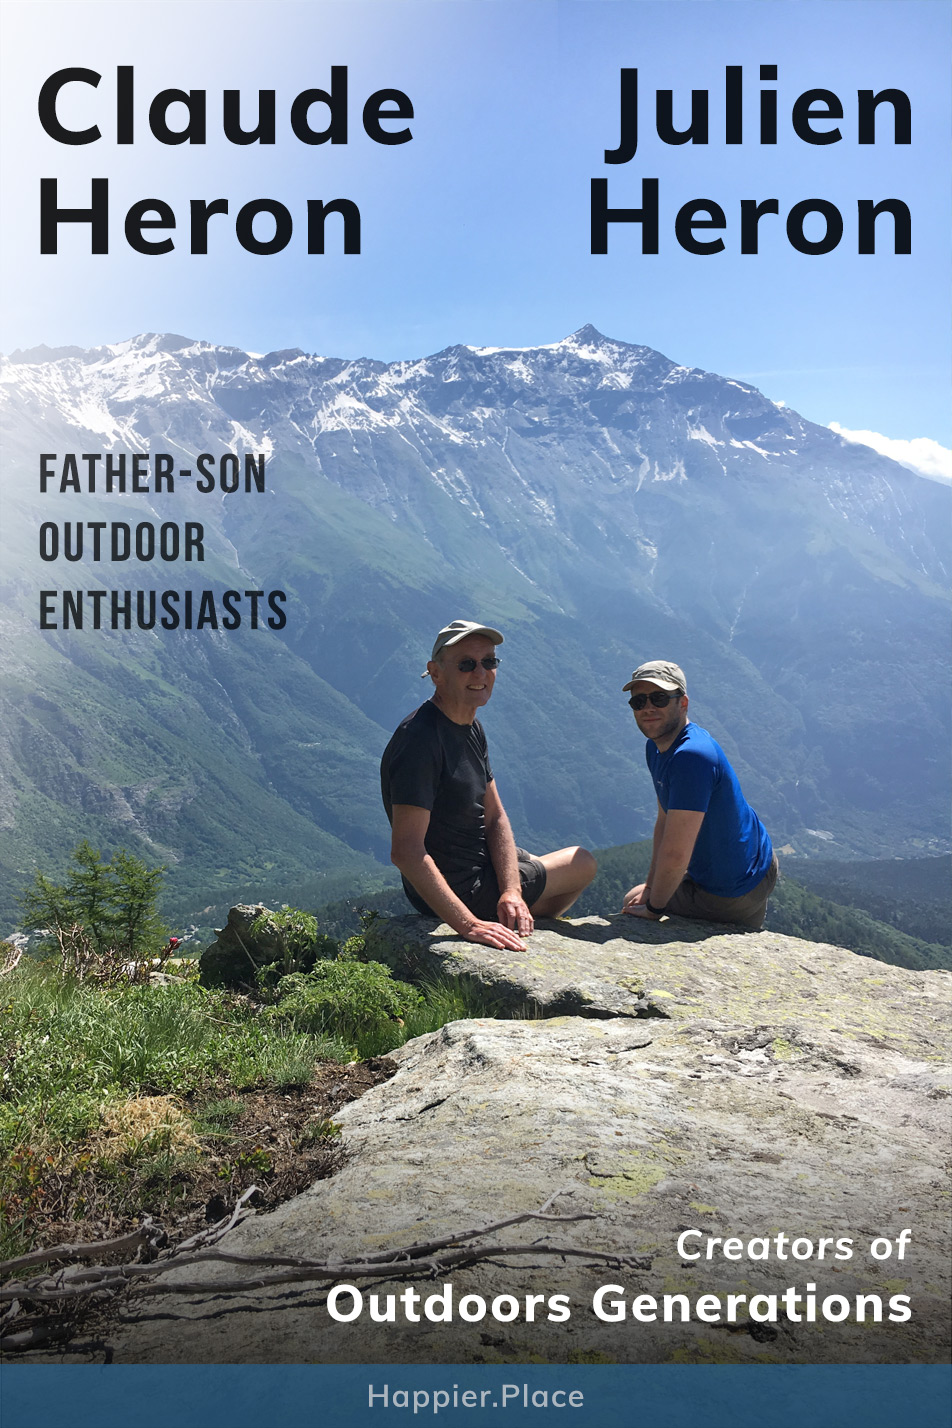 Outdoors Generations - Claude and Julien Heron, outdoor enthusiasts, educators, advocates, hiking, climbing, mountain view